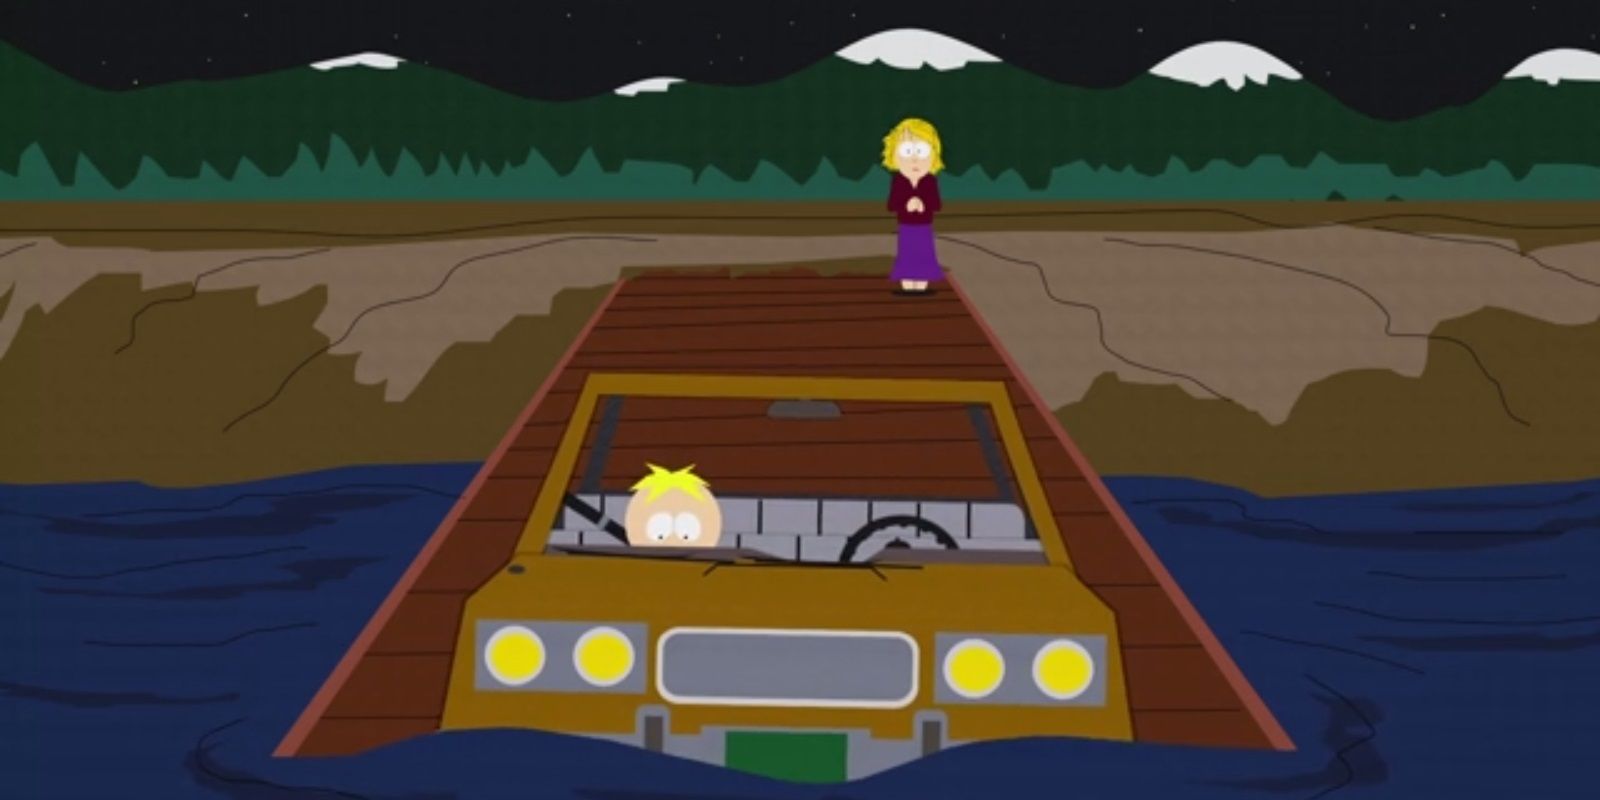 Butters in a car going into the river while his mom stands back and watches